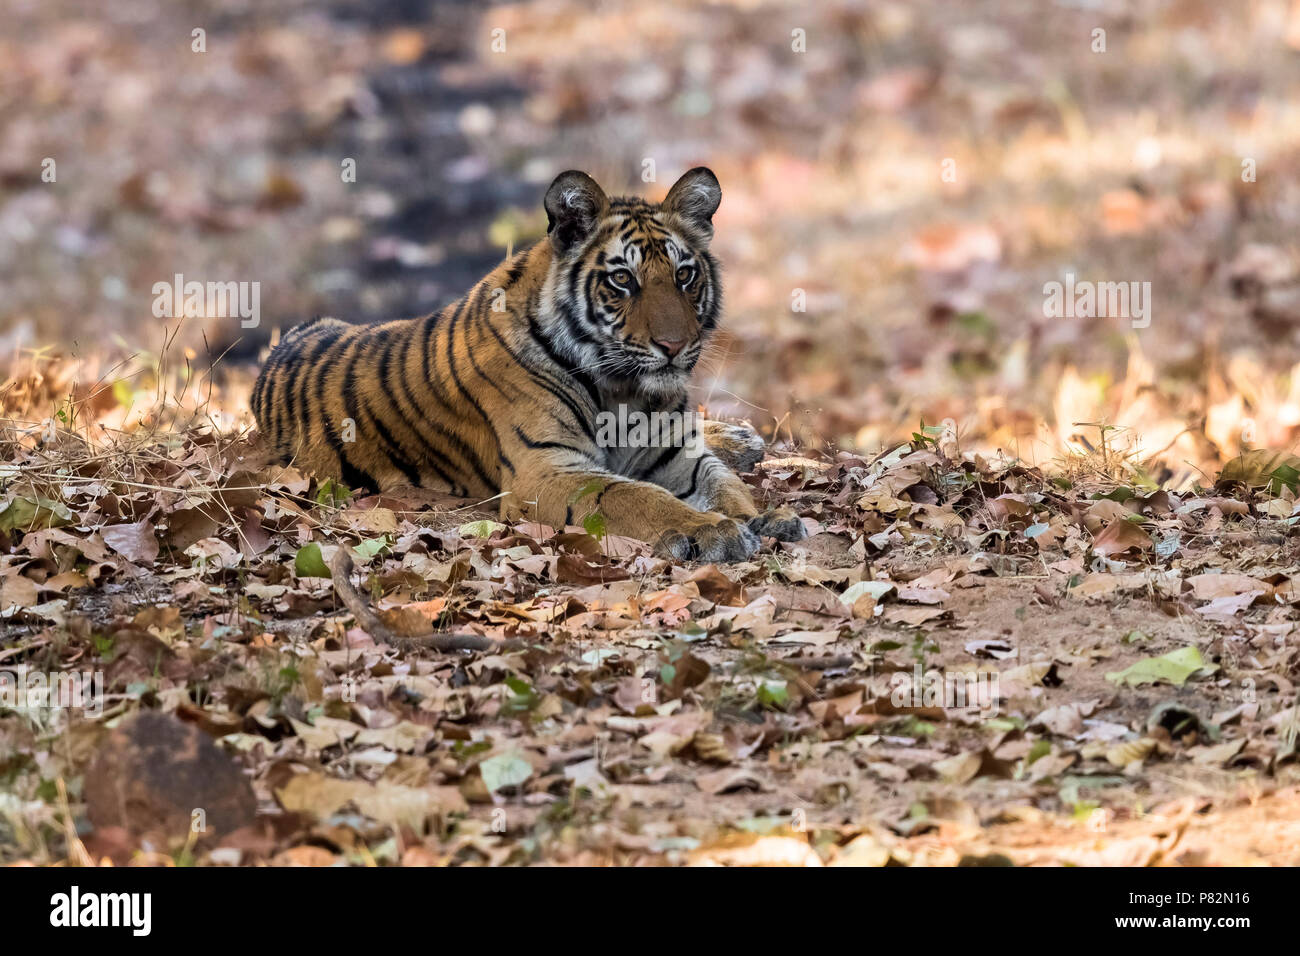 One-year cub Bengal Tiger near his mother sitting on trail in Tala, Bandavgarh, India. March 10, 2017. Stock Photo